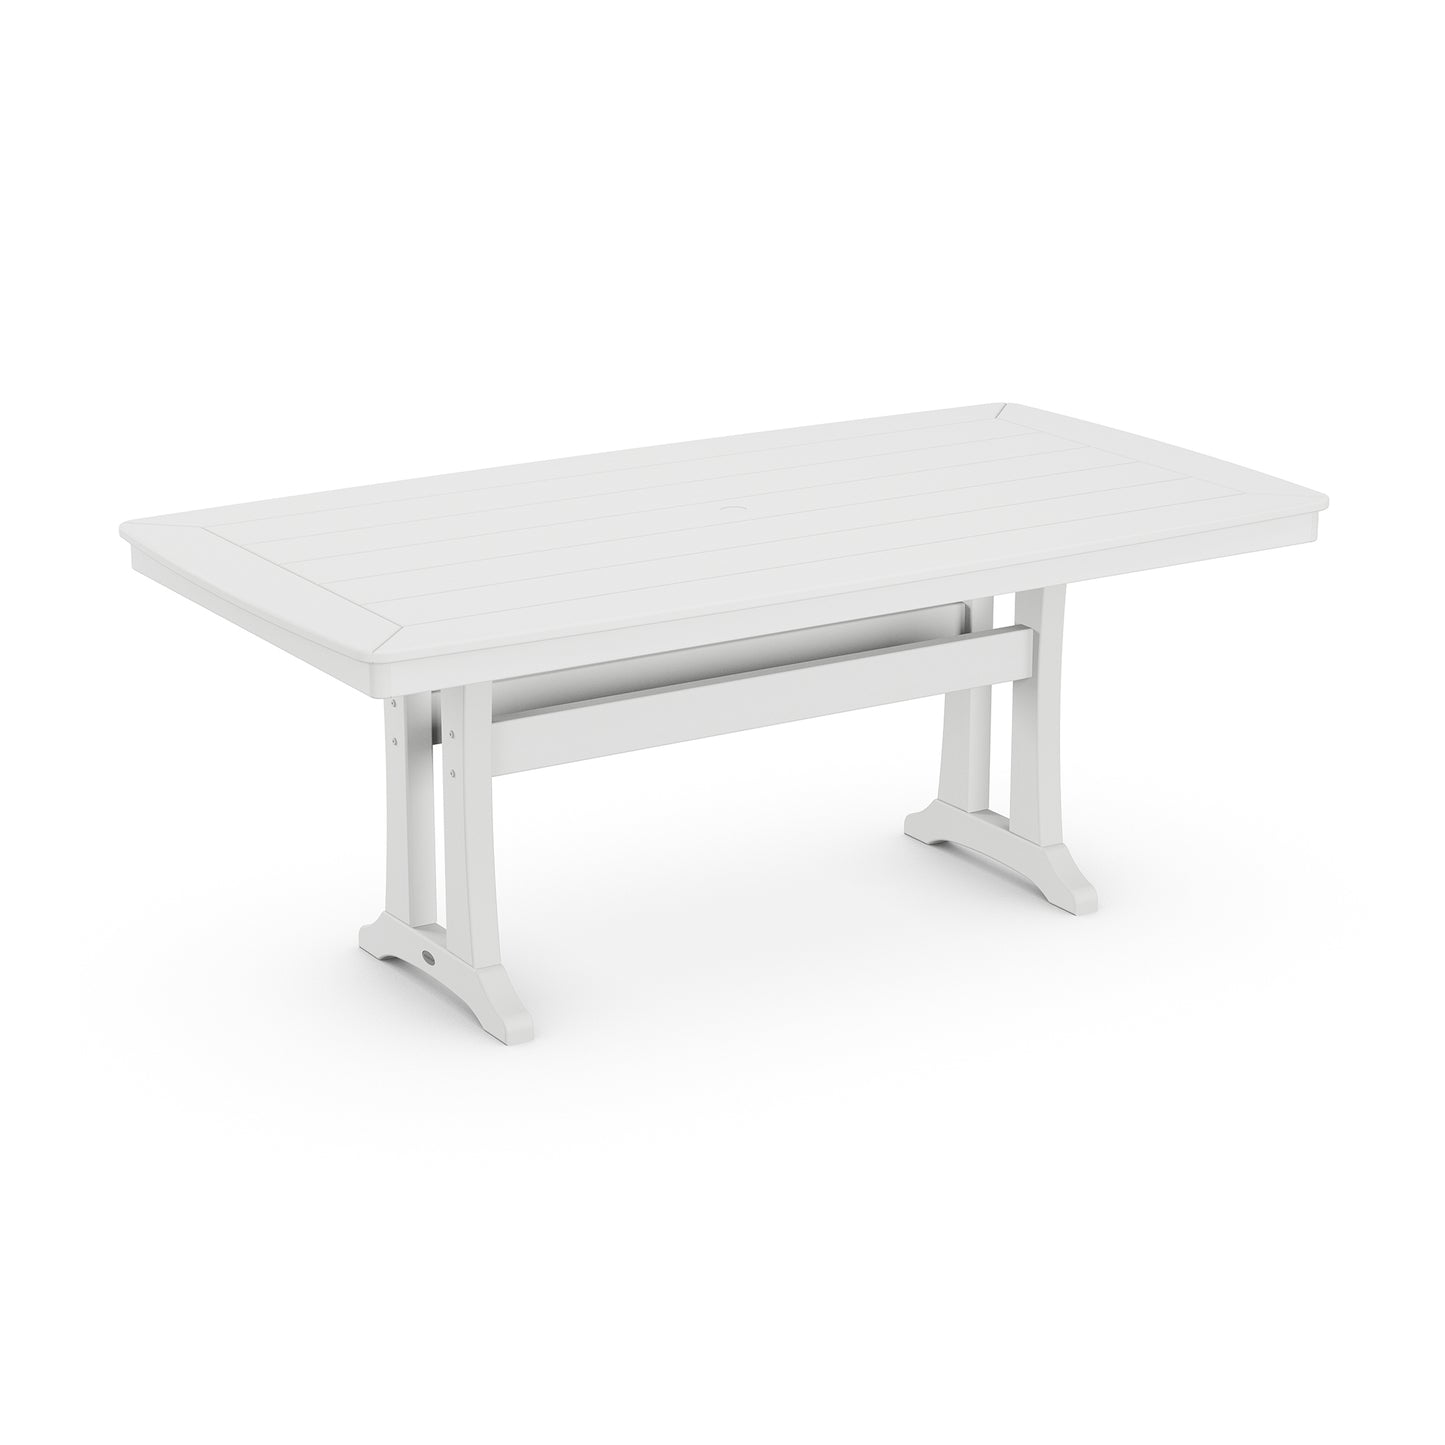 A modern white adjustable-height POLYWOOD Nautical Trestle 38" x 73" Dining Table isolated on a plain white background, featuring a rectangular top and sturdy metal legs.